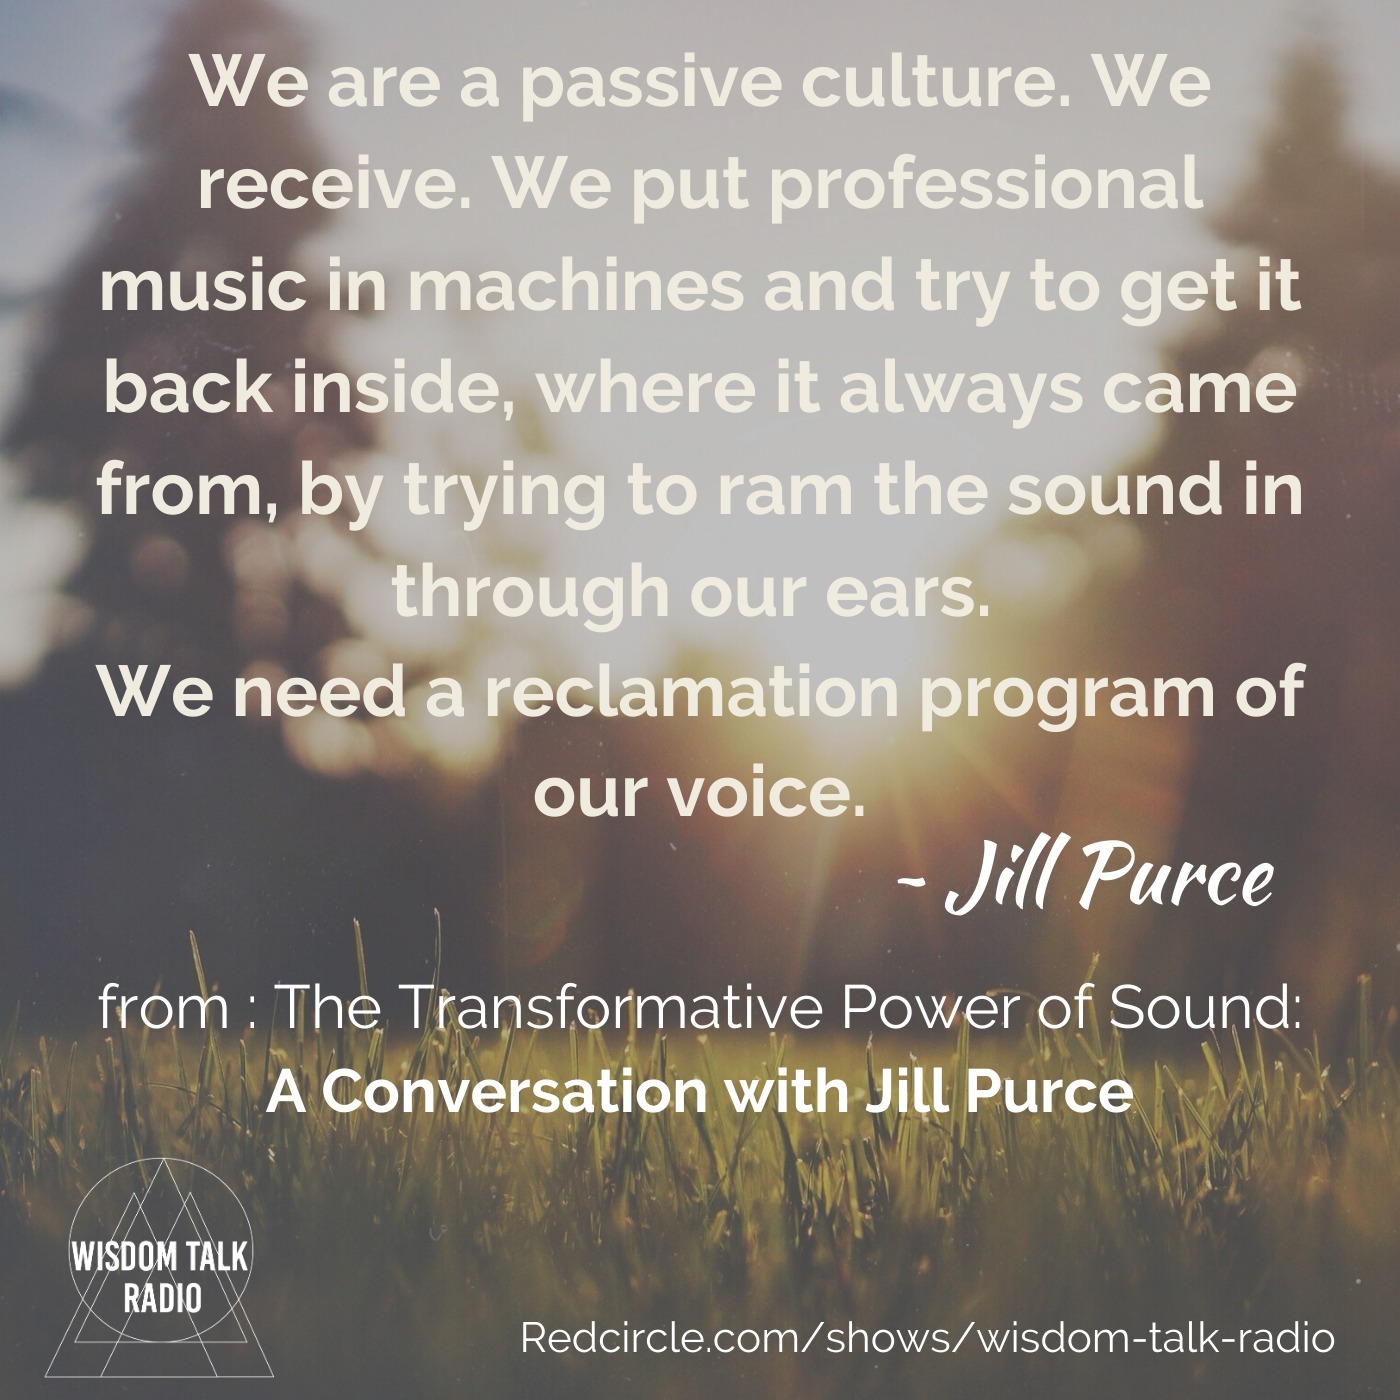 The Transformative Power of Sound: a Conversation With Jill Purce